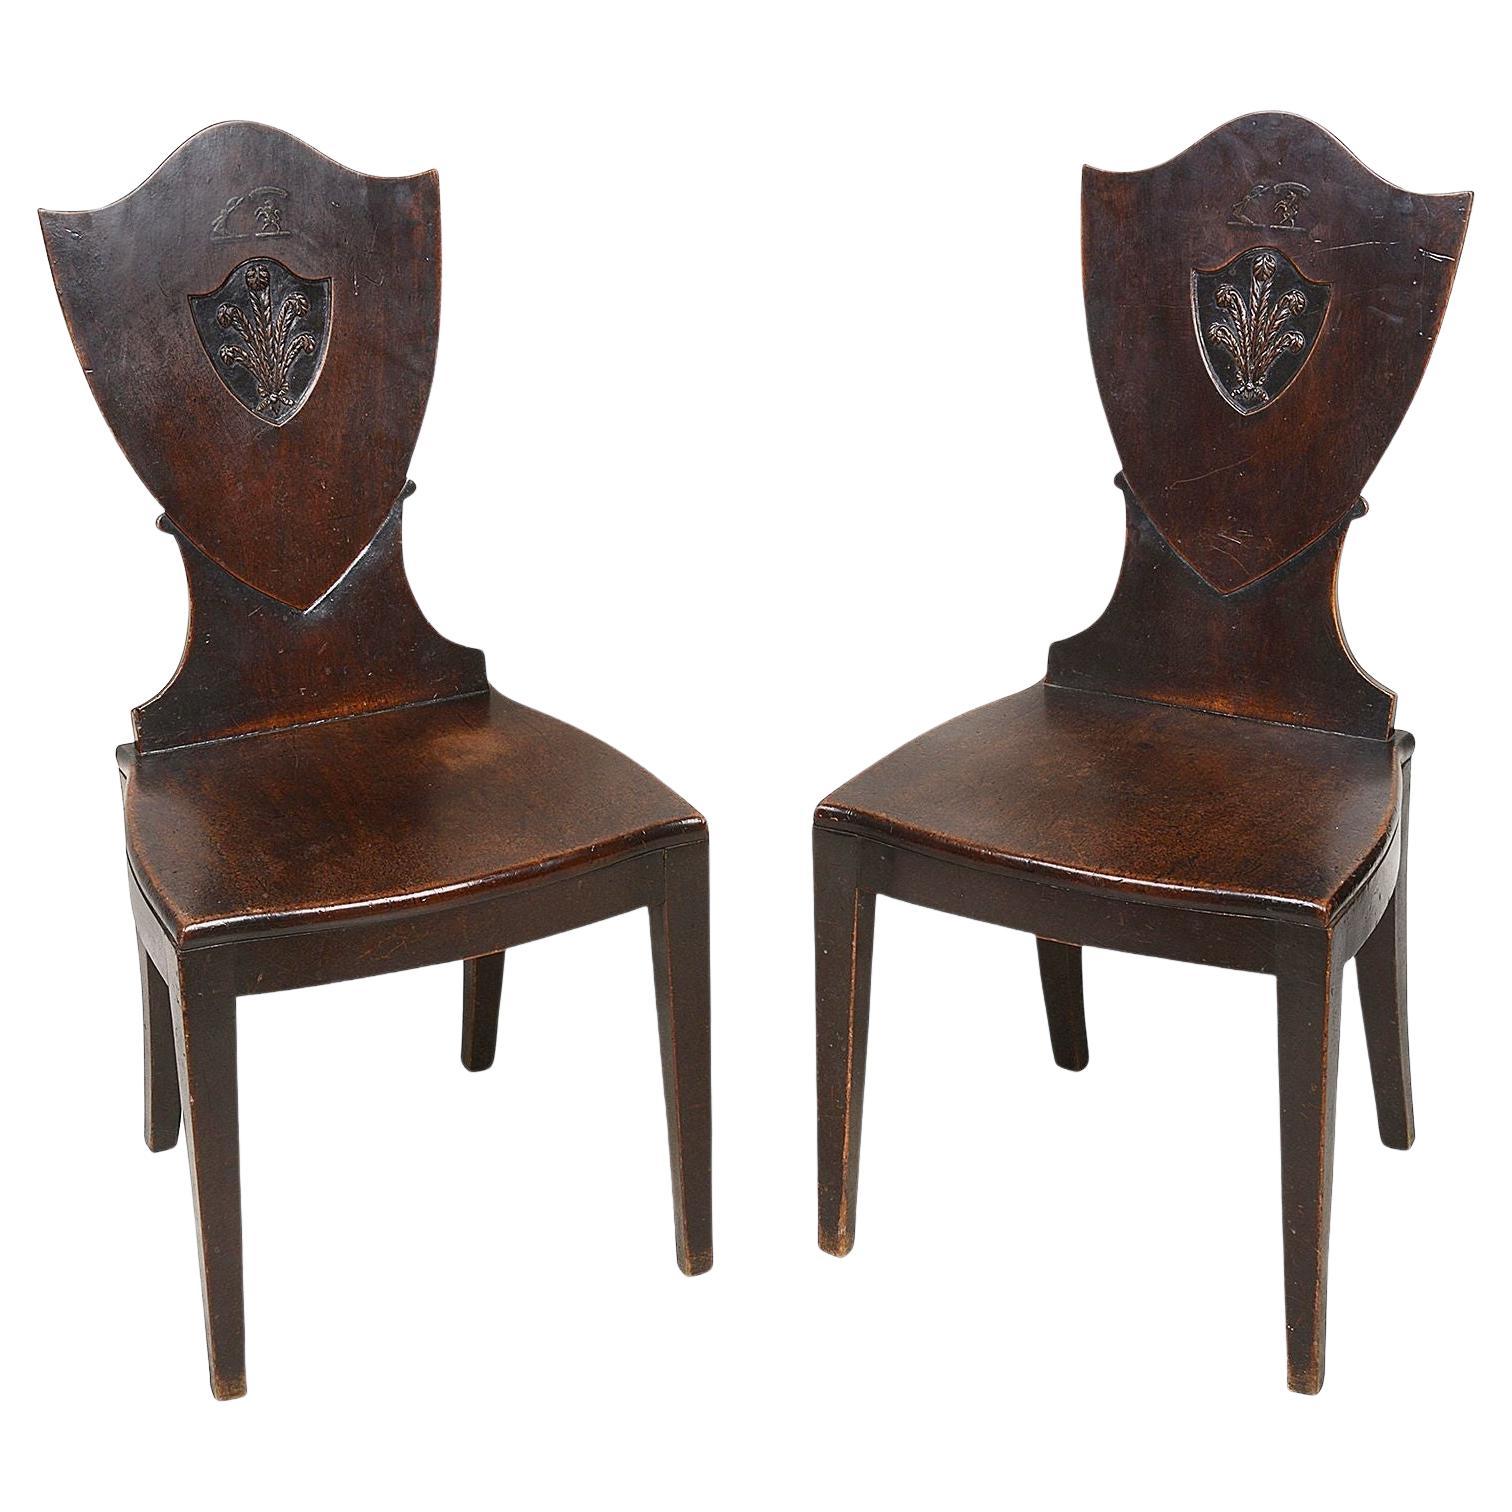 Pair 18th Century Mahogany Sheild Back Hall Chairs with Prince of Wales Feathers For Sale